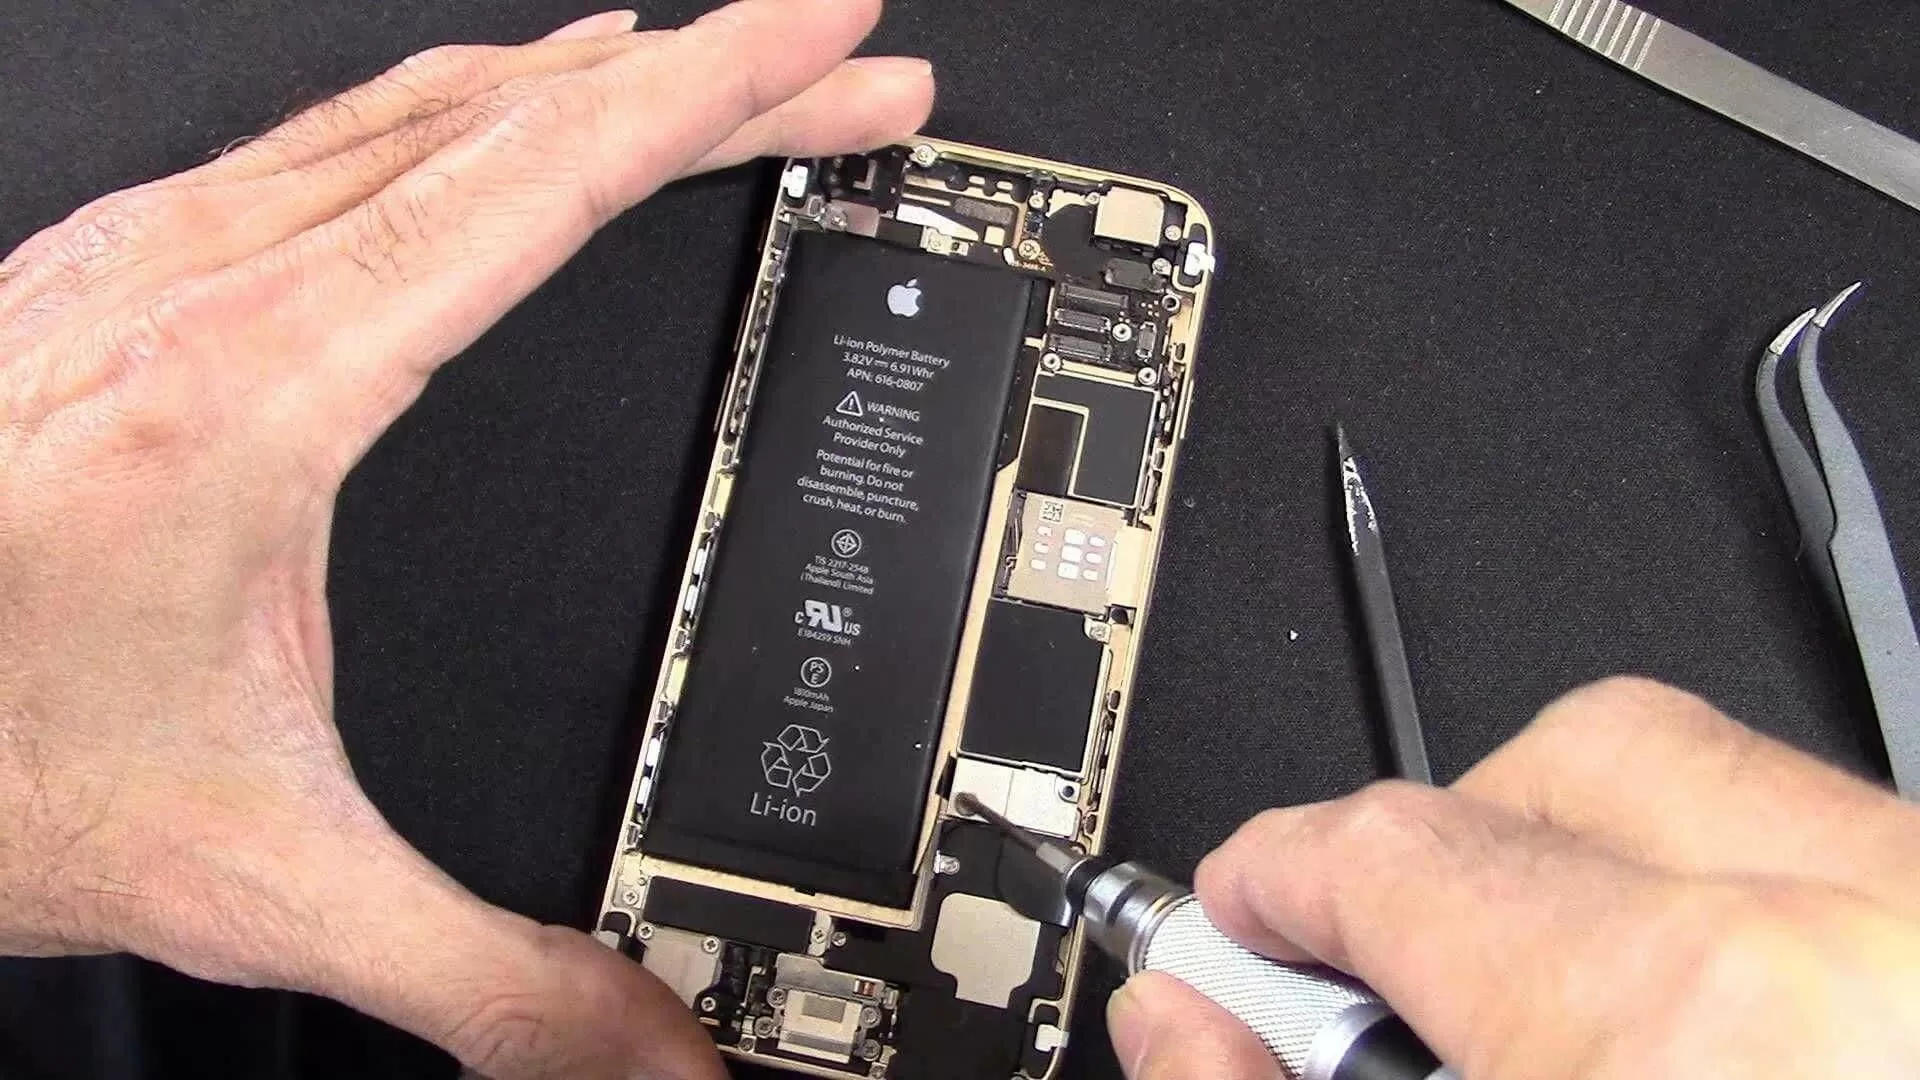 Apple reportedly moved to a more customer-friendly iPhone repair policy